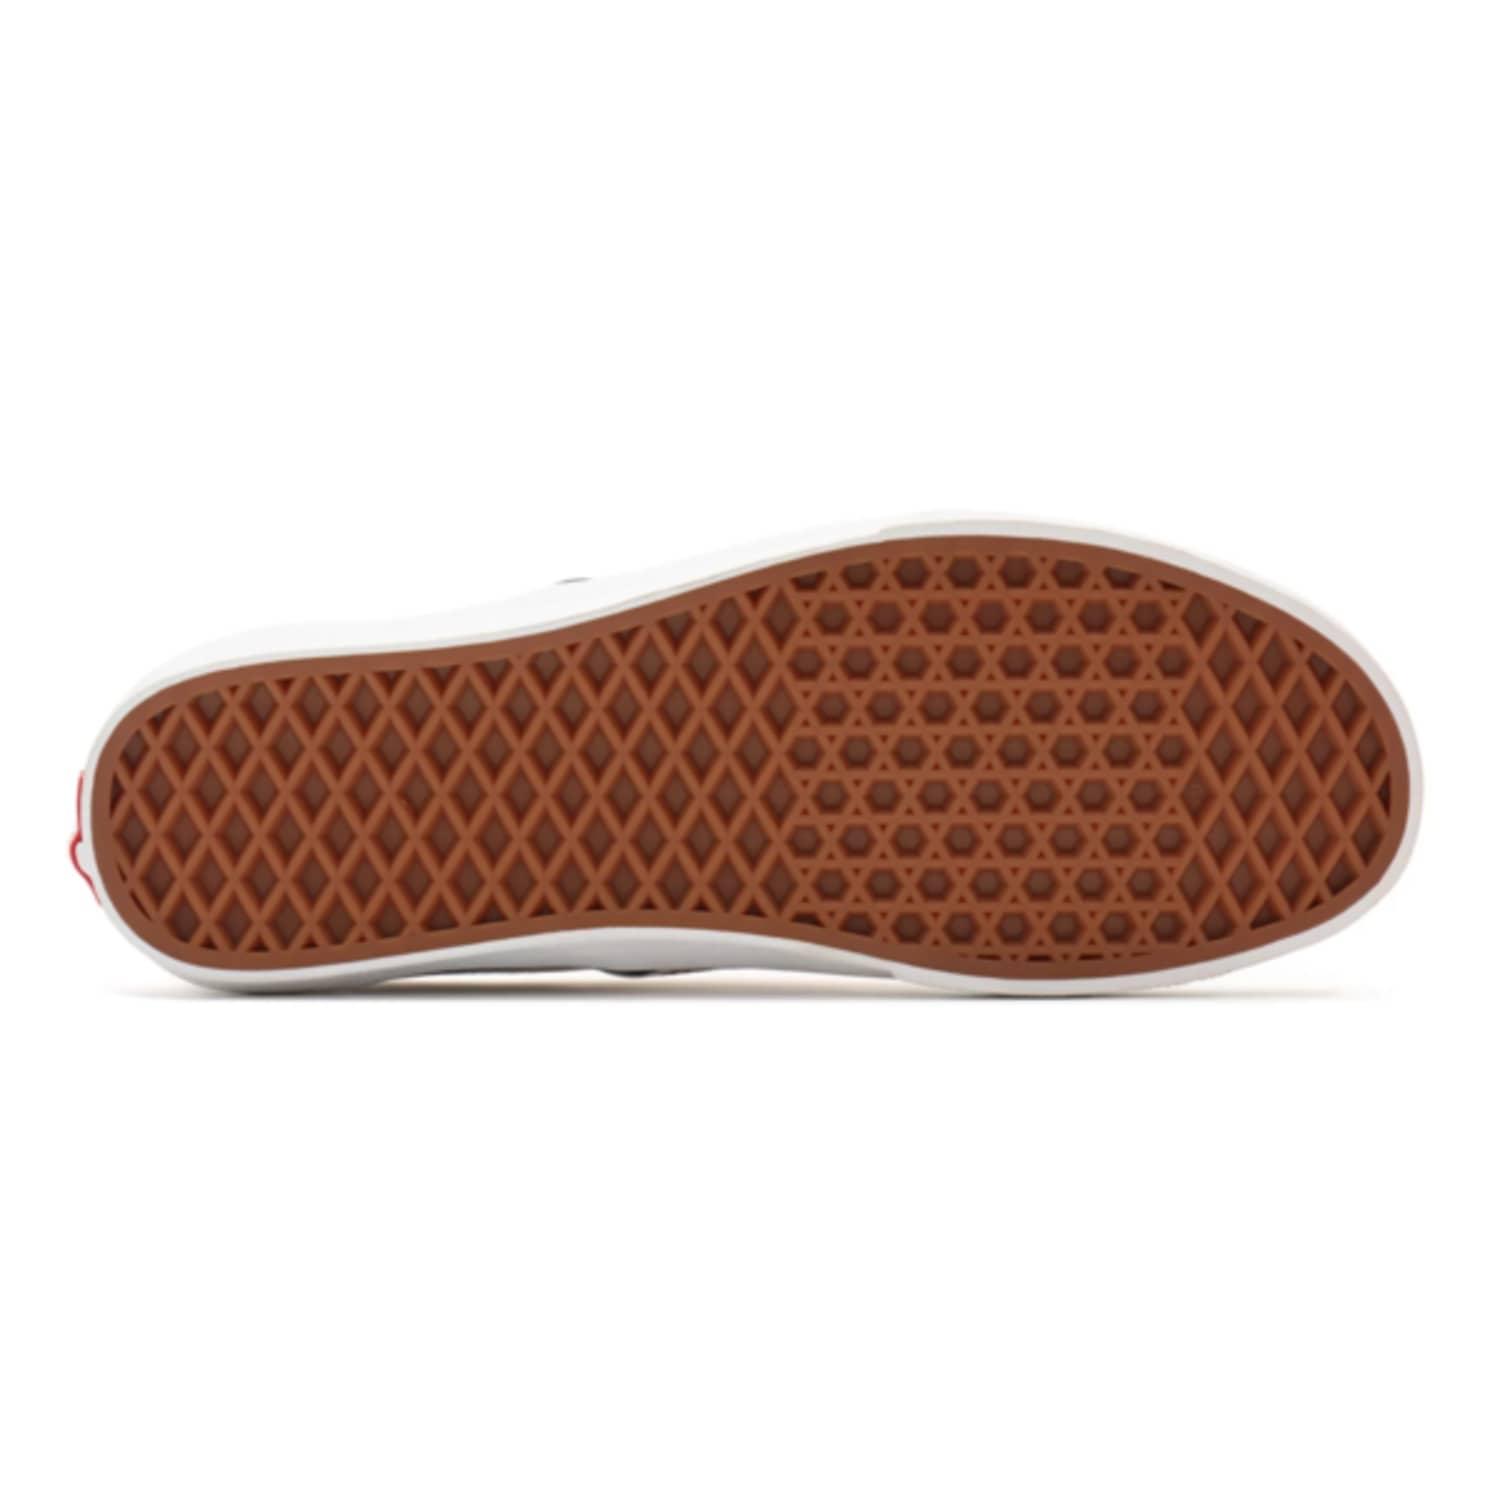 Vans Classic Slip On Shoes Checkerboard Golden Brown True White | Lyst